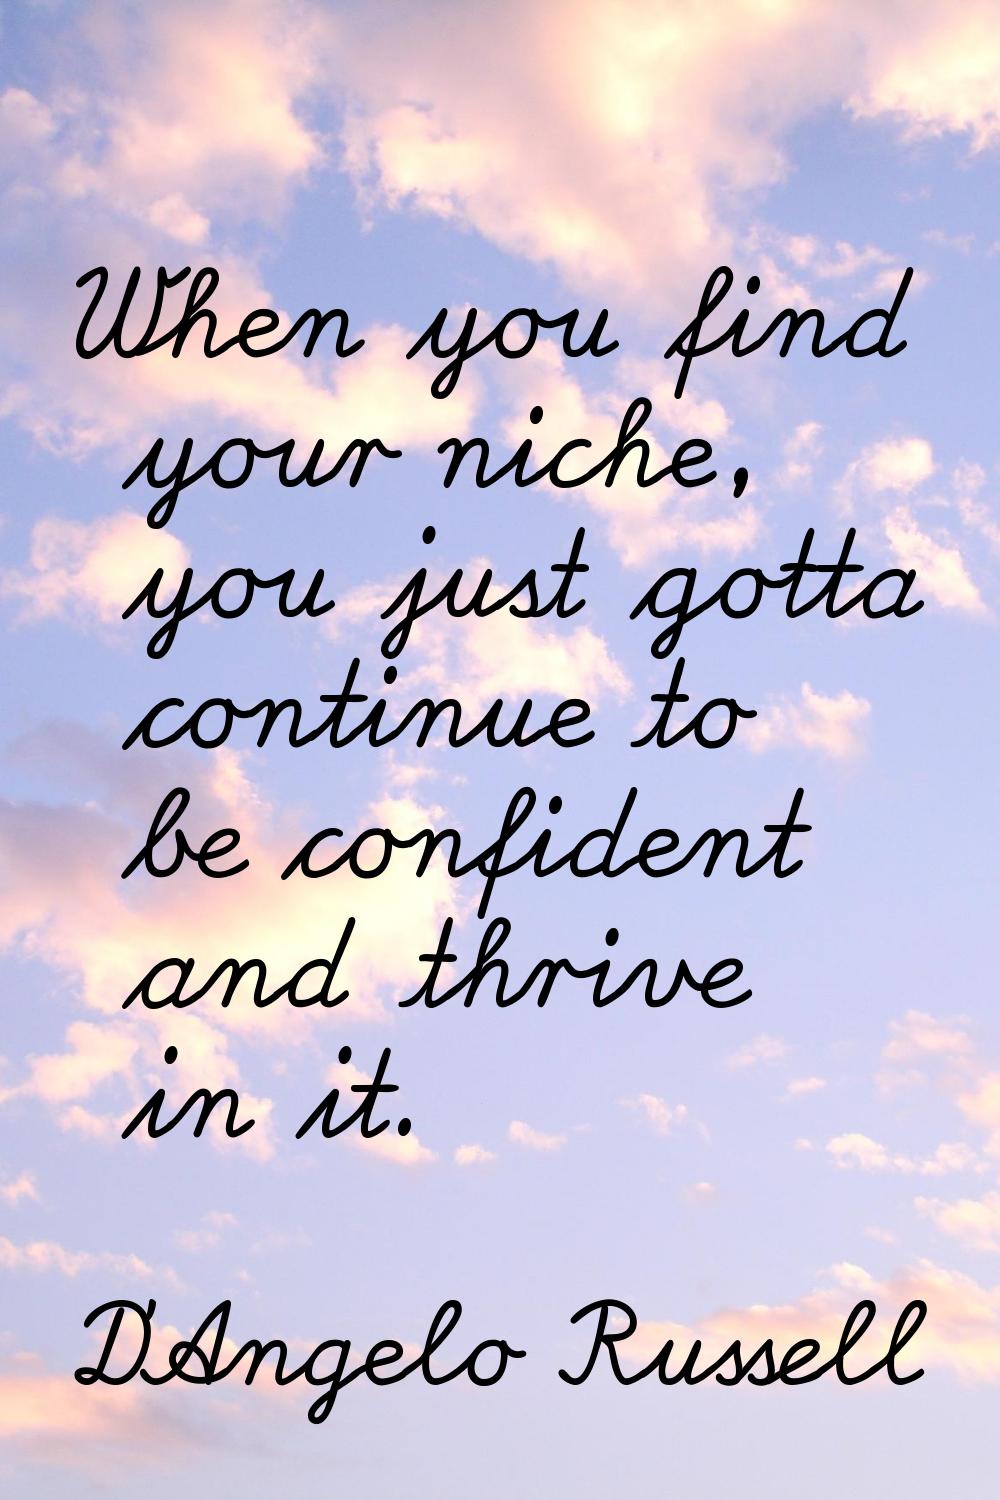 When you find your niche, you just gotta continue to be confident and thrive in it.